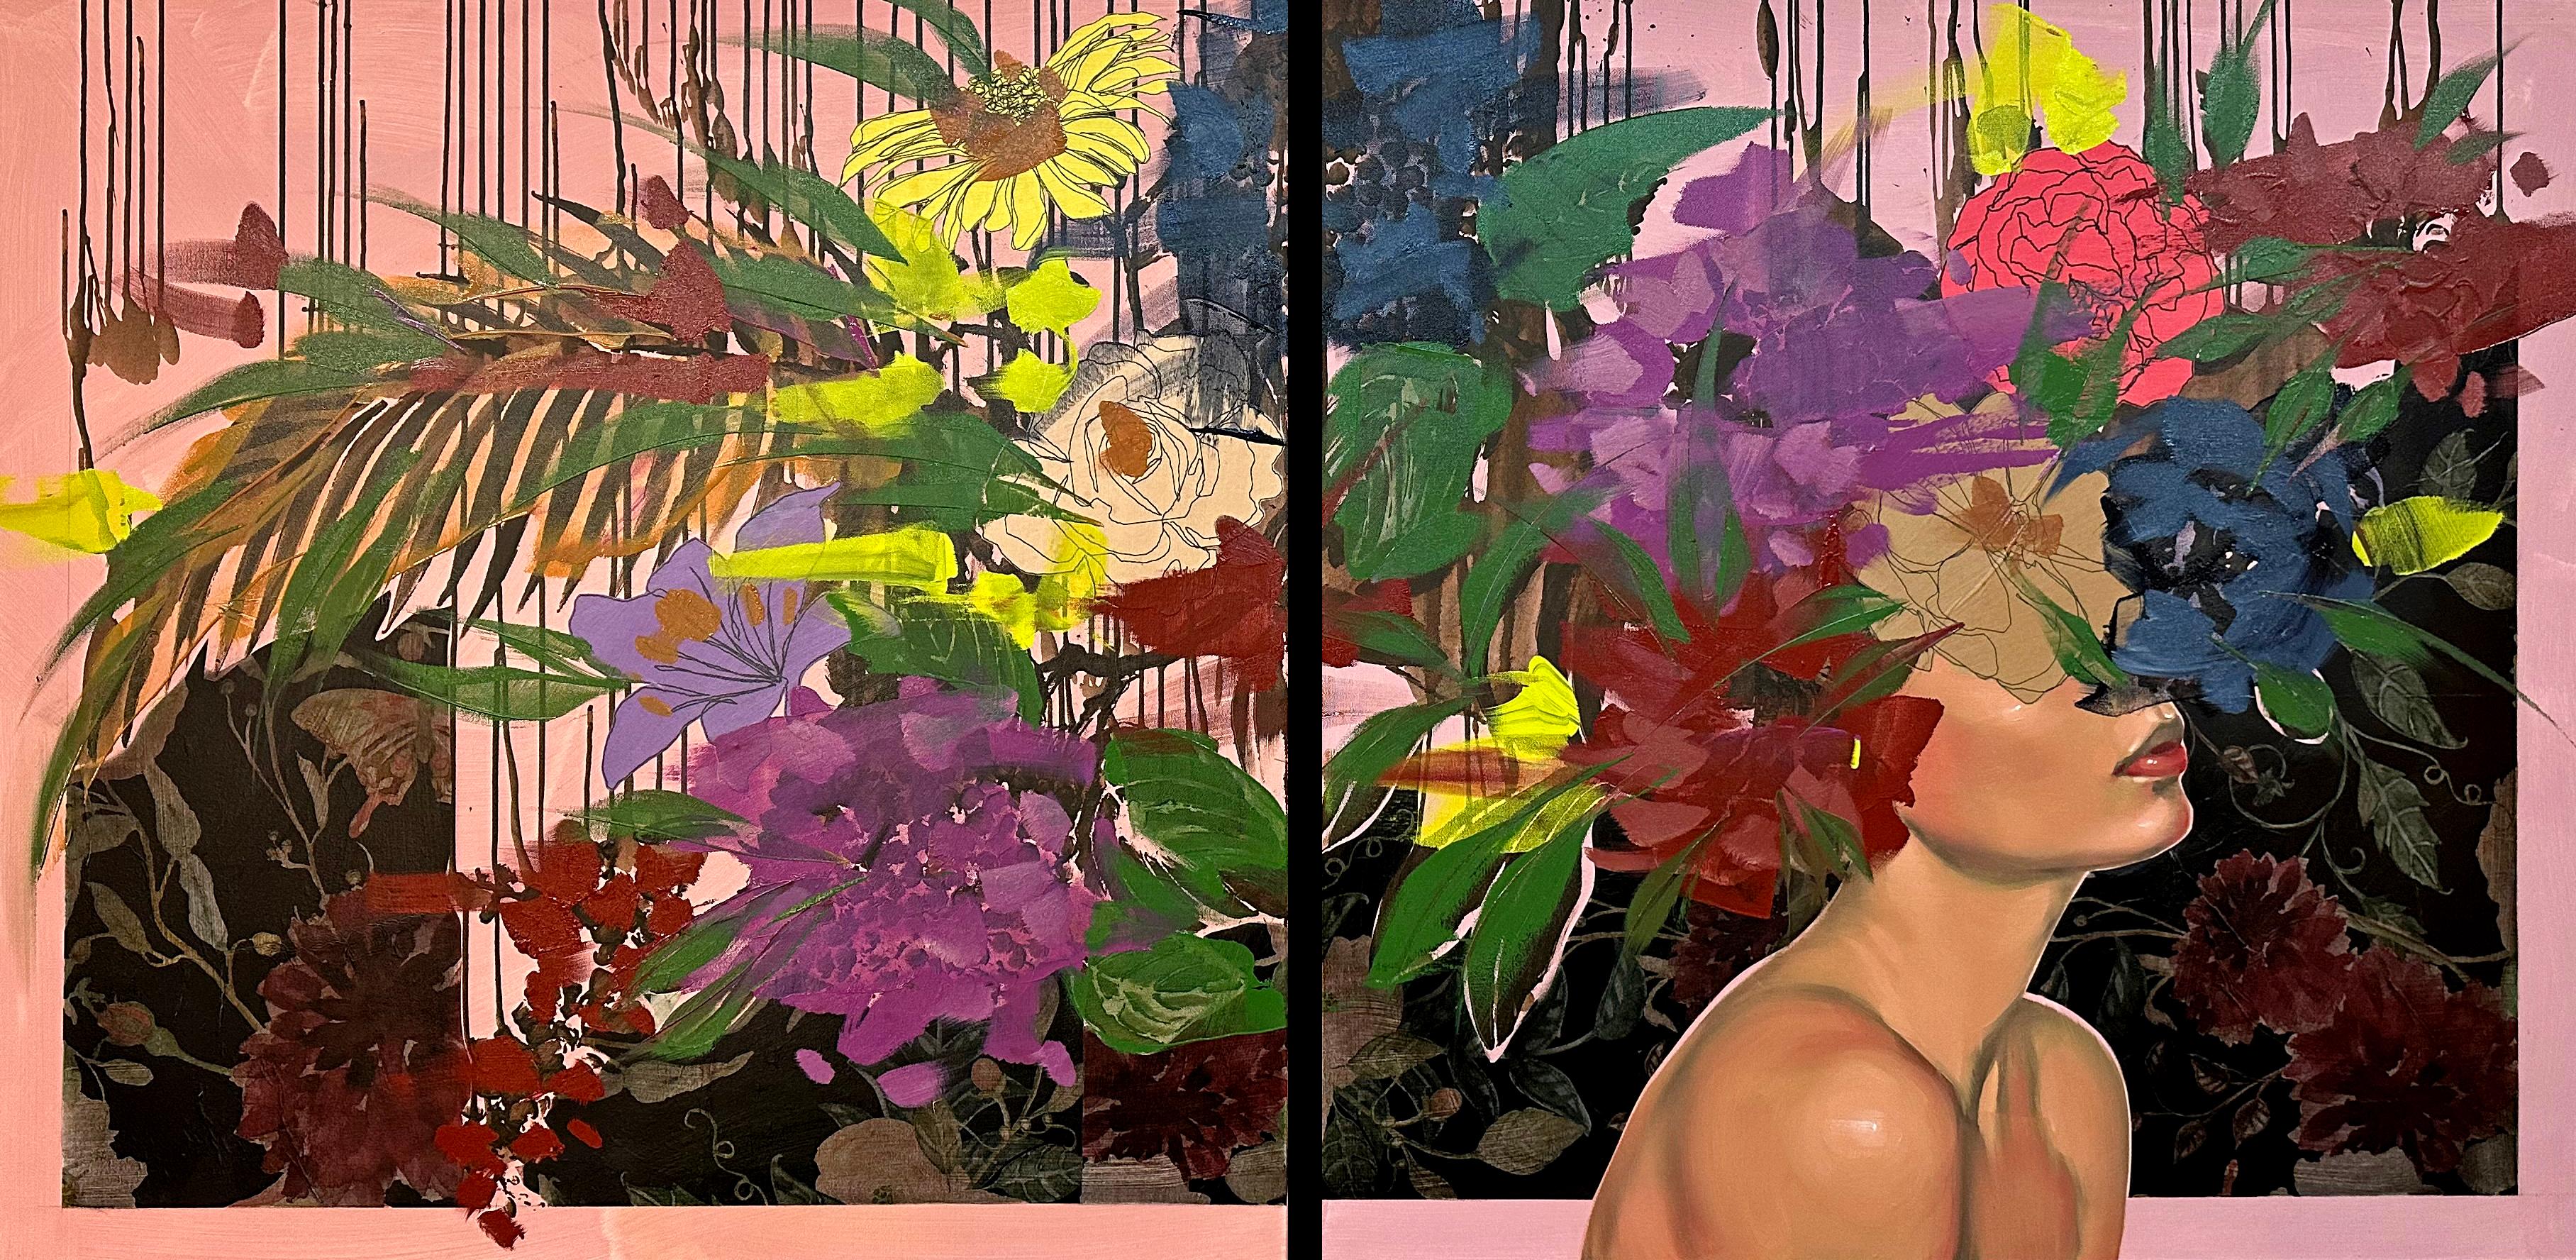 ANNA KINCAIDE
"I've Made My Escape (Diptych)"
Oil & Mixed Media on Canvas
36 x 72 inches

Communicating emotion and narrative with limited assistance from her figure’s facial expressions, Anna Kincaide creates cascades of flowers that cover her